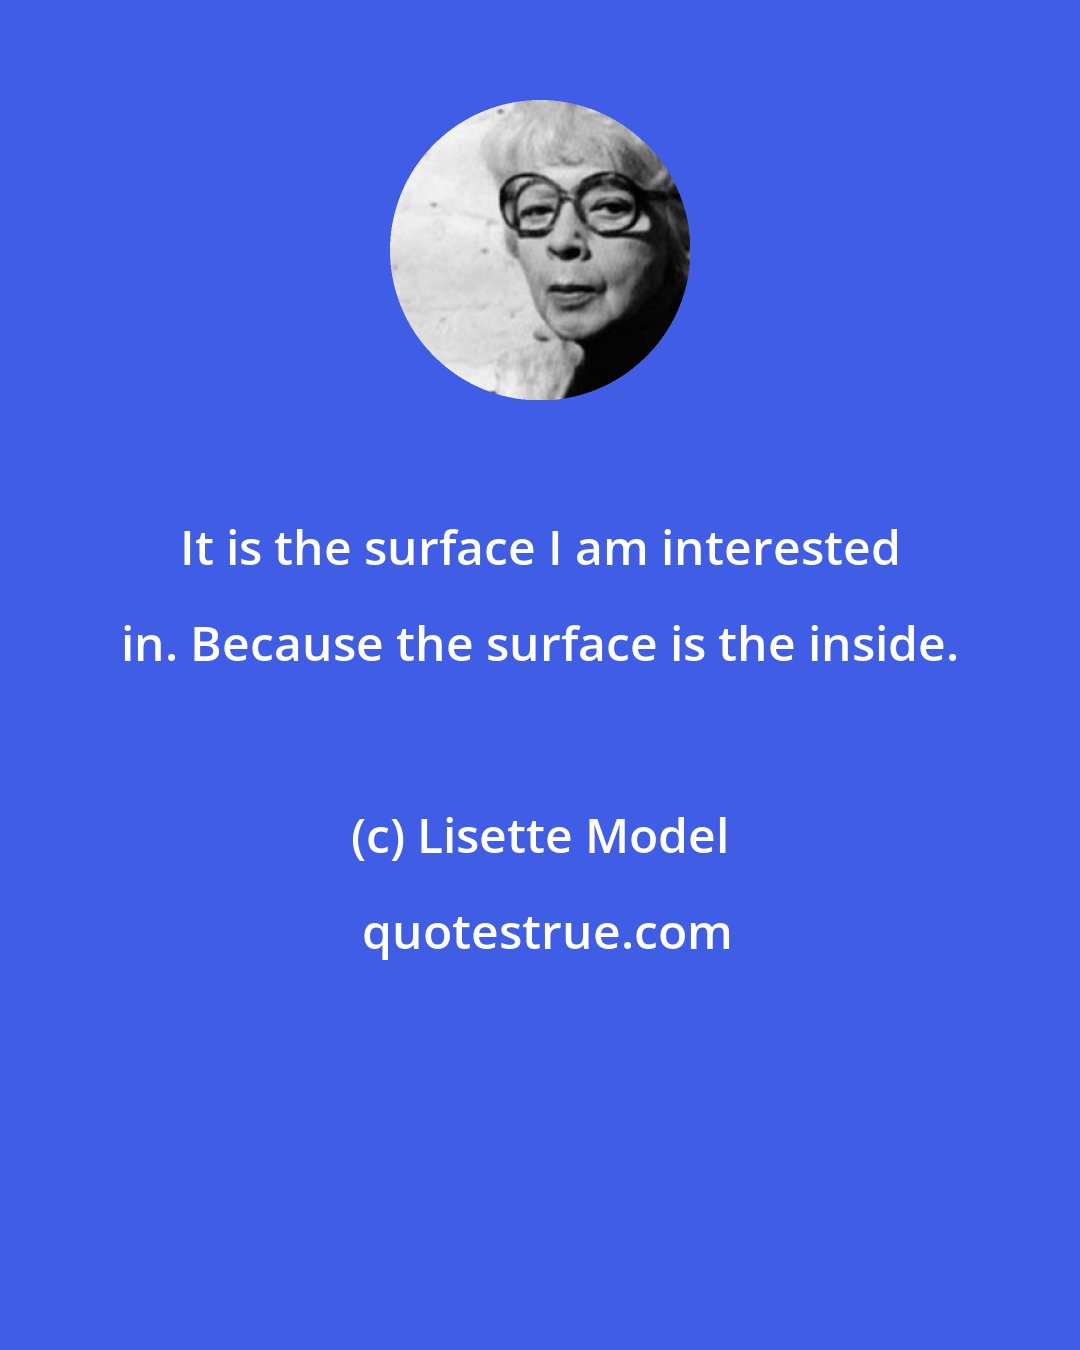 Lisette Model: It is the surface I am interested in. Because the surface is the inside.